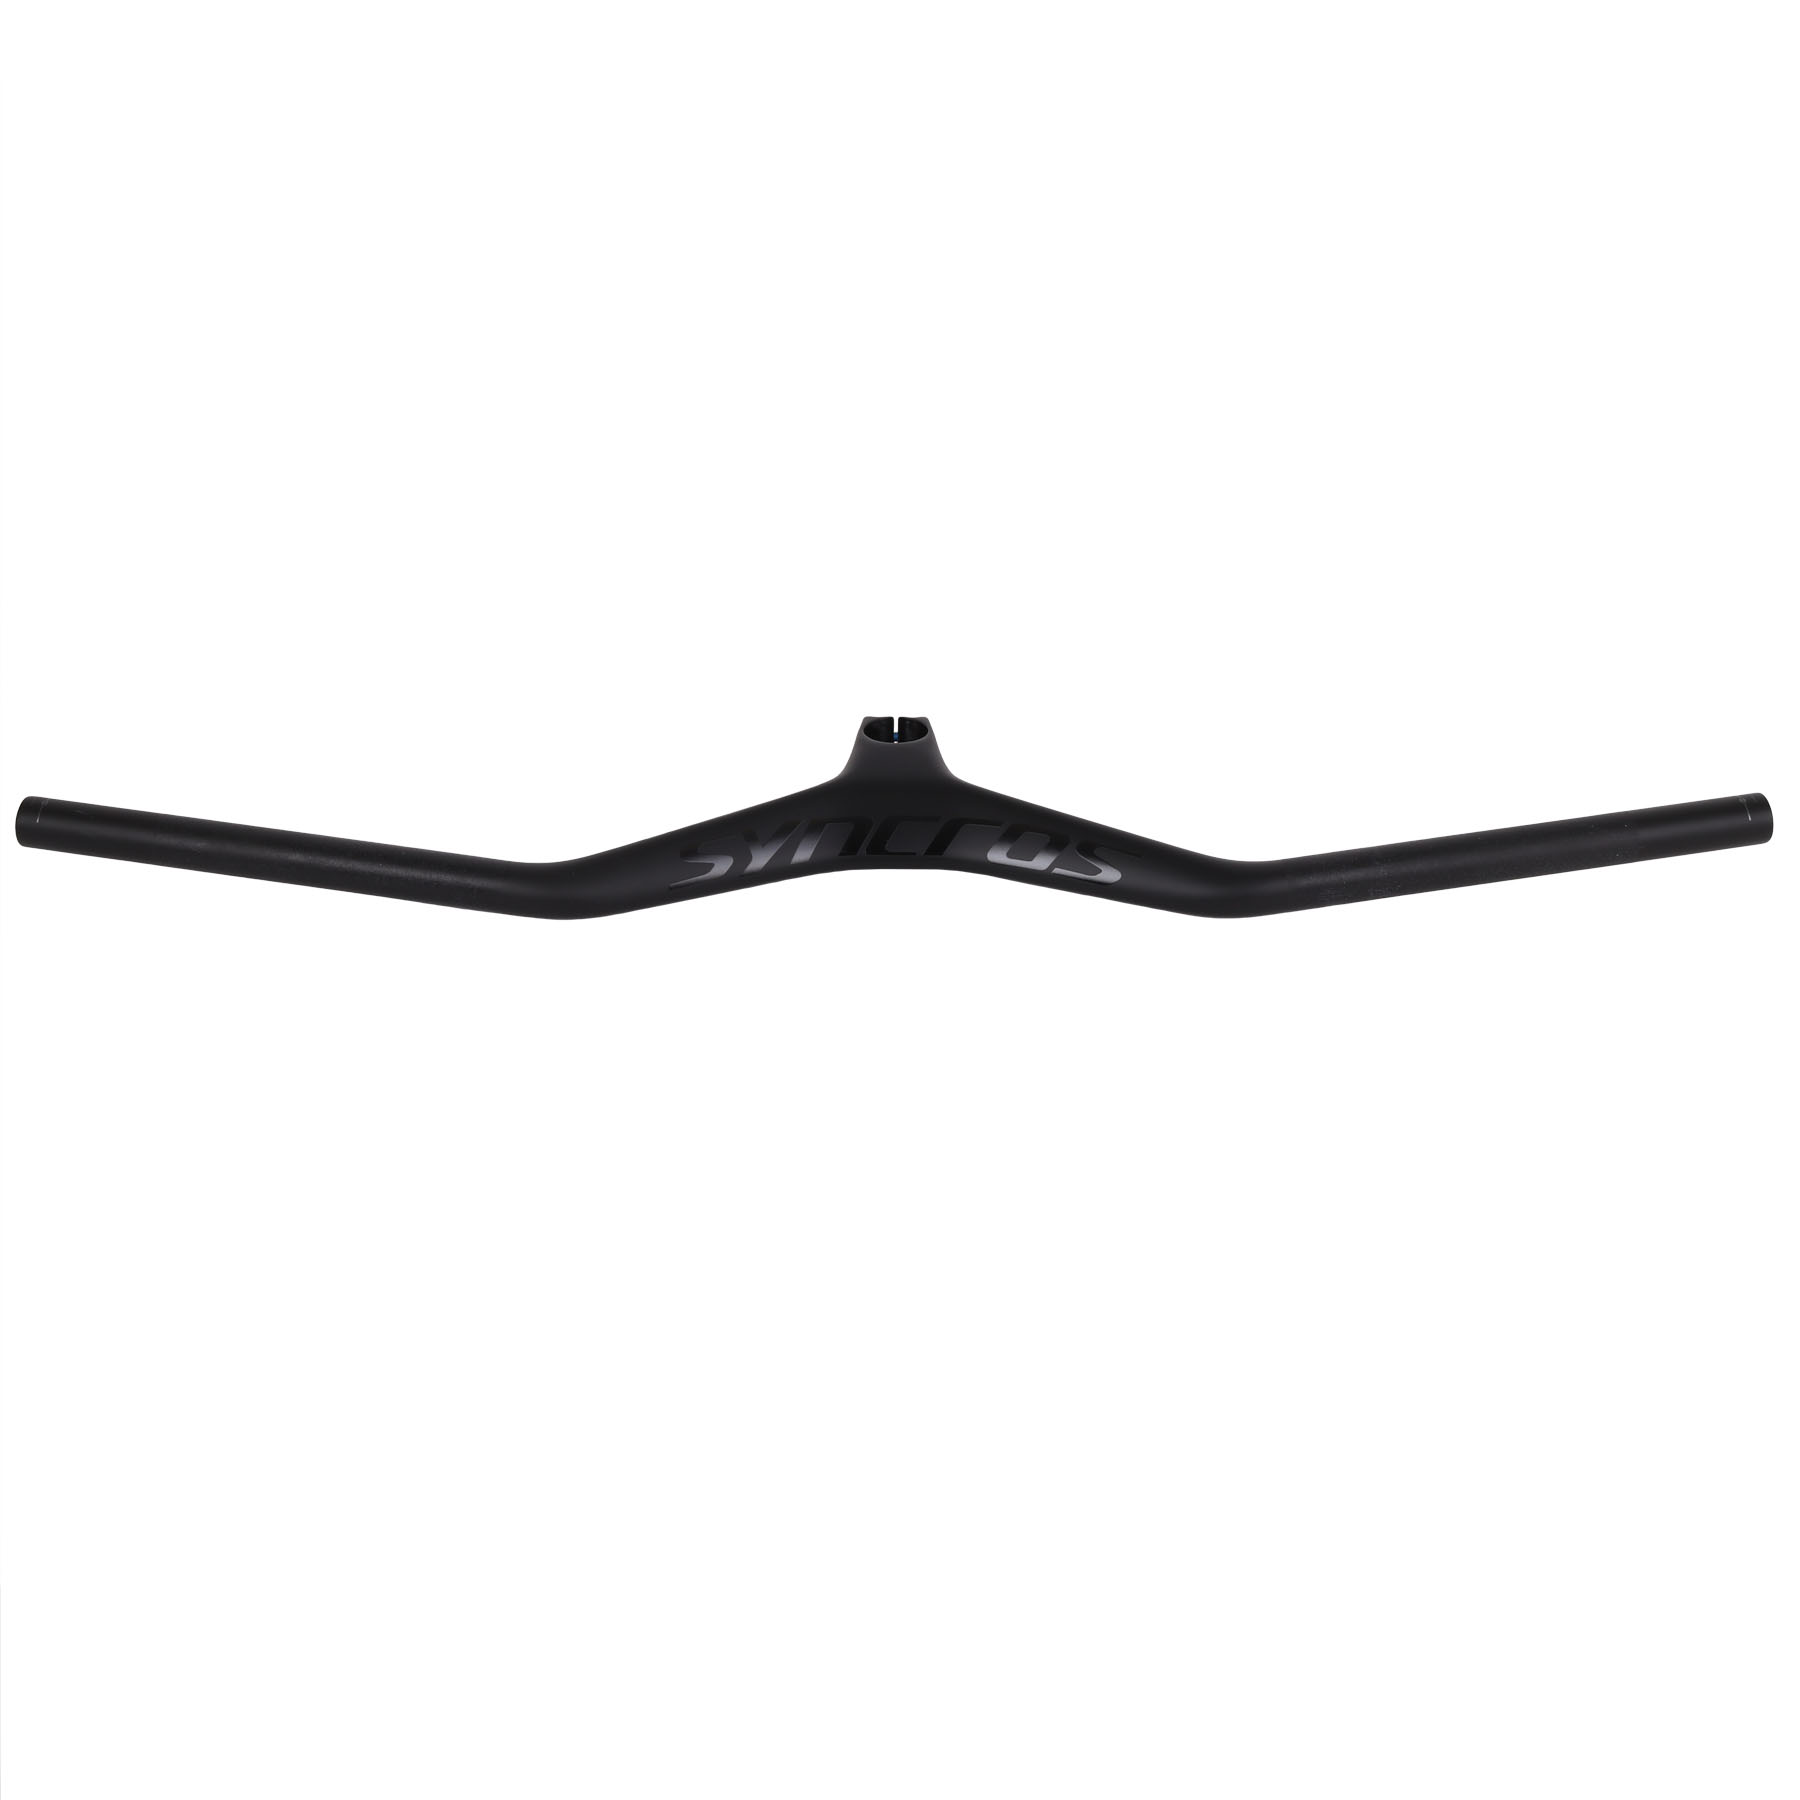 Picture of Syncros Fraser IC SL Carbon Handlebar -17° Special Edition - black